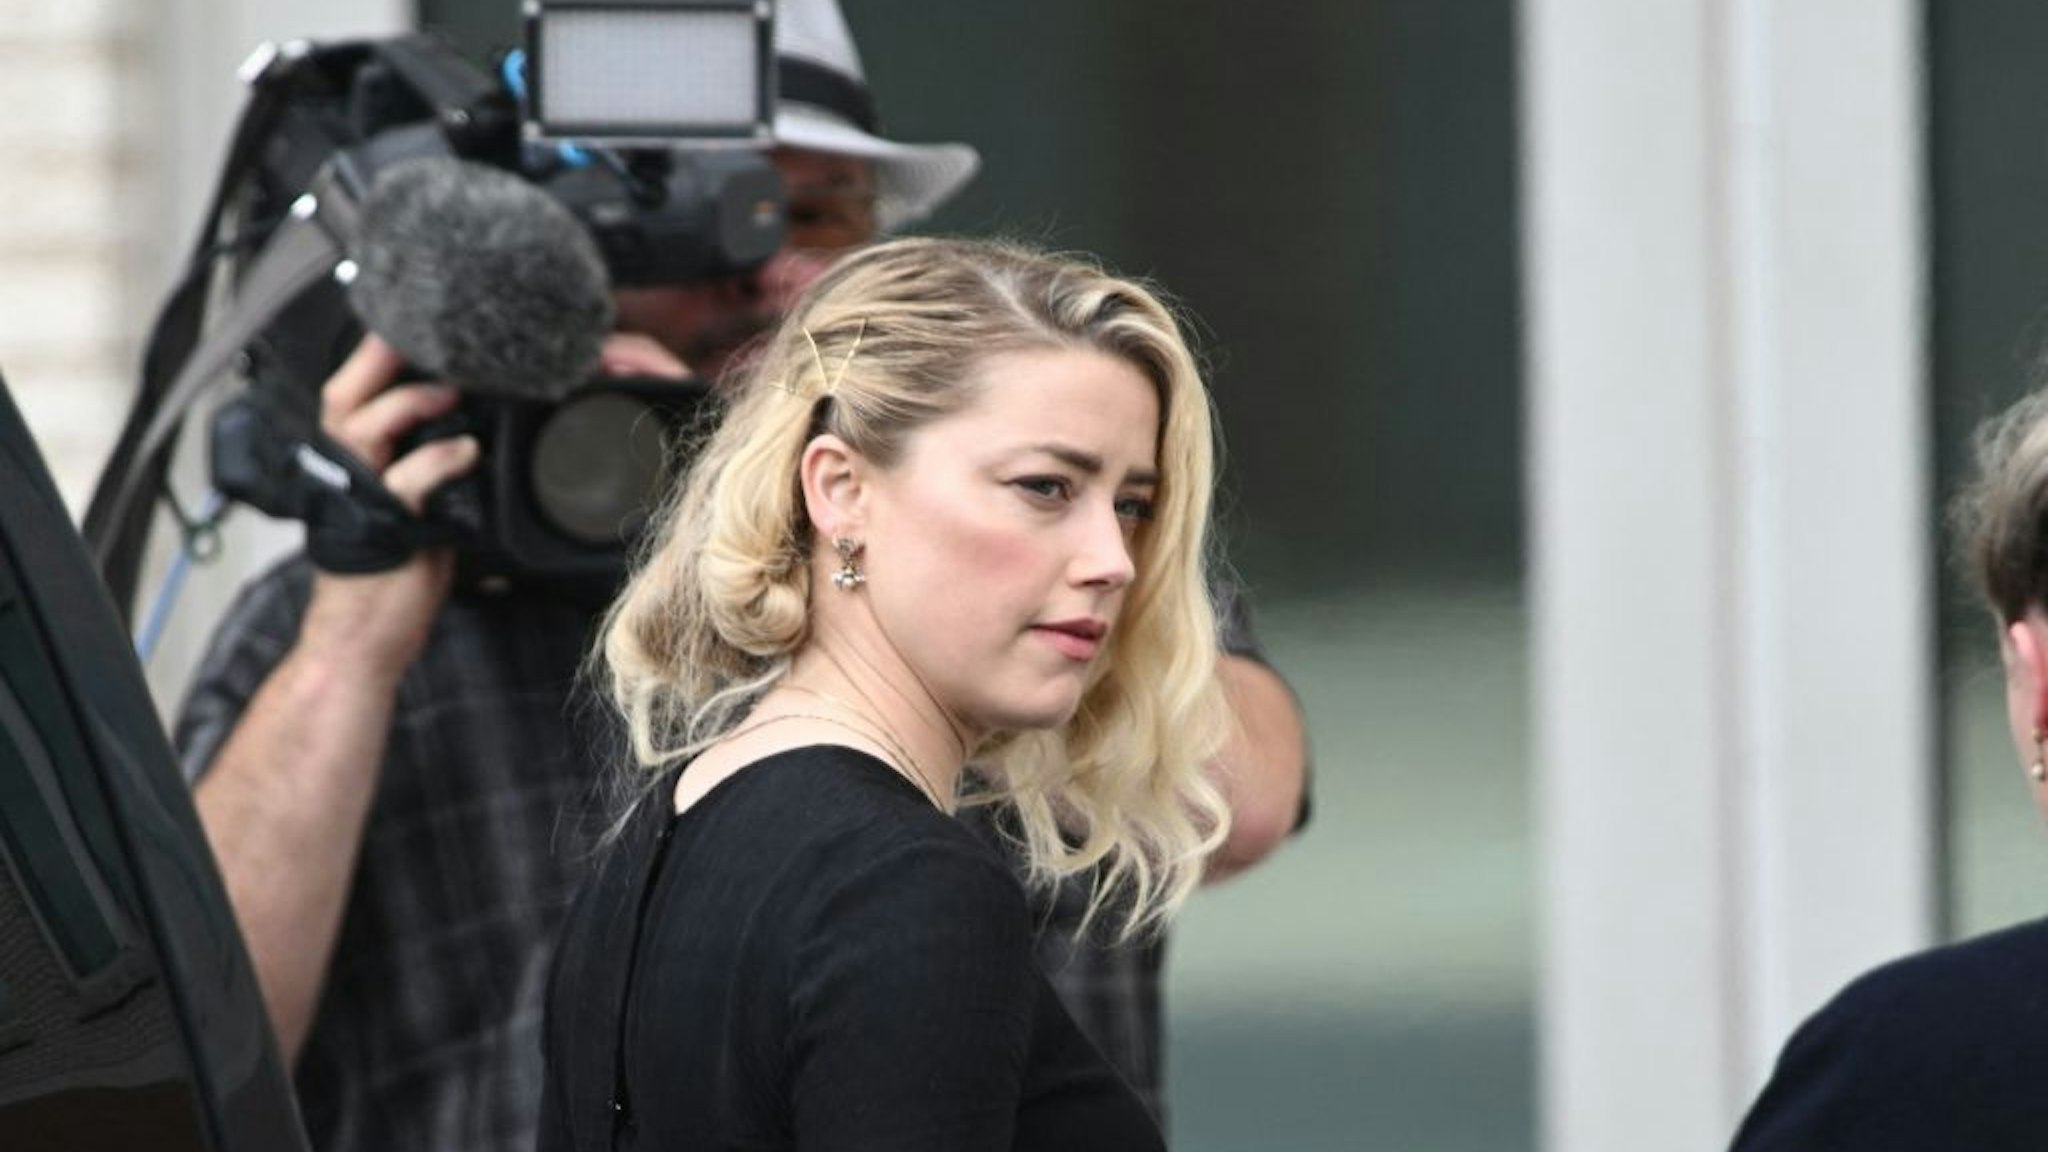 US actress Amber Heard arrives to hear the verdict in the Depp v. Heard trial at the Fairfax County Circuit Courthouse in Fairfax, Virginia, on June 1, 2022. - The jury reached a verdict on Wednesday in the high-profile defamation case between actor Johnny Depp and his ex-wife Heard. The seven-person Virginia jury has been deliberating for about 13 hours over three days in Fairfax County Circuit Court near the US capital. The court said the verdict is to be read out at 3:00 pm (1900 GMT). (Photo by Brendan SMIALOWSKI / AFP) (Photo by BRENDAN SMIALOWSKI/AFP via Getty Images)